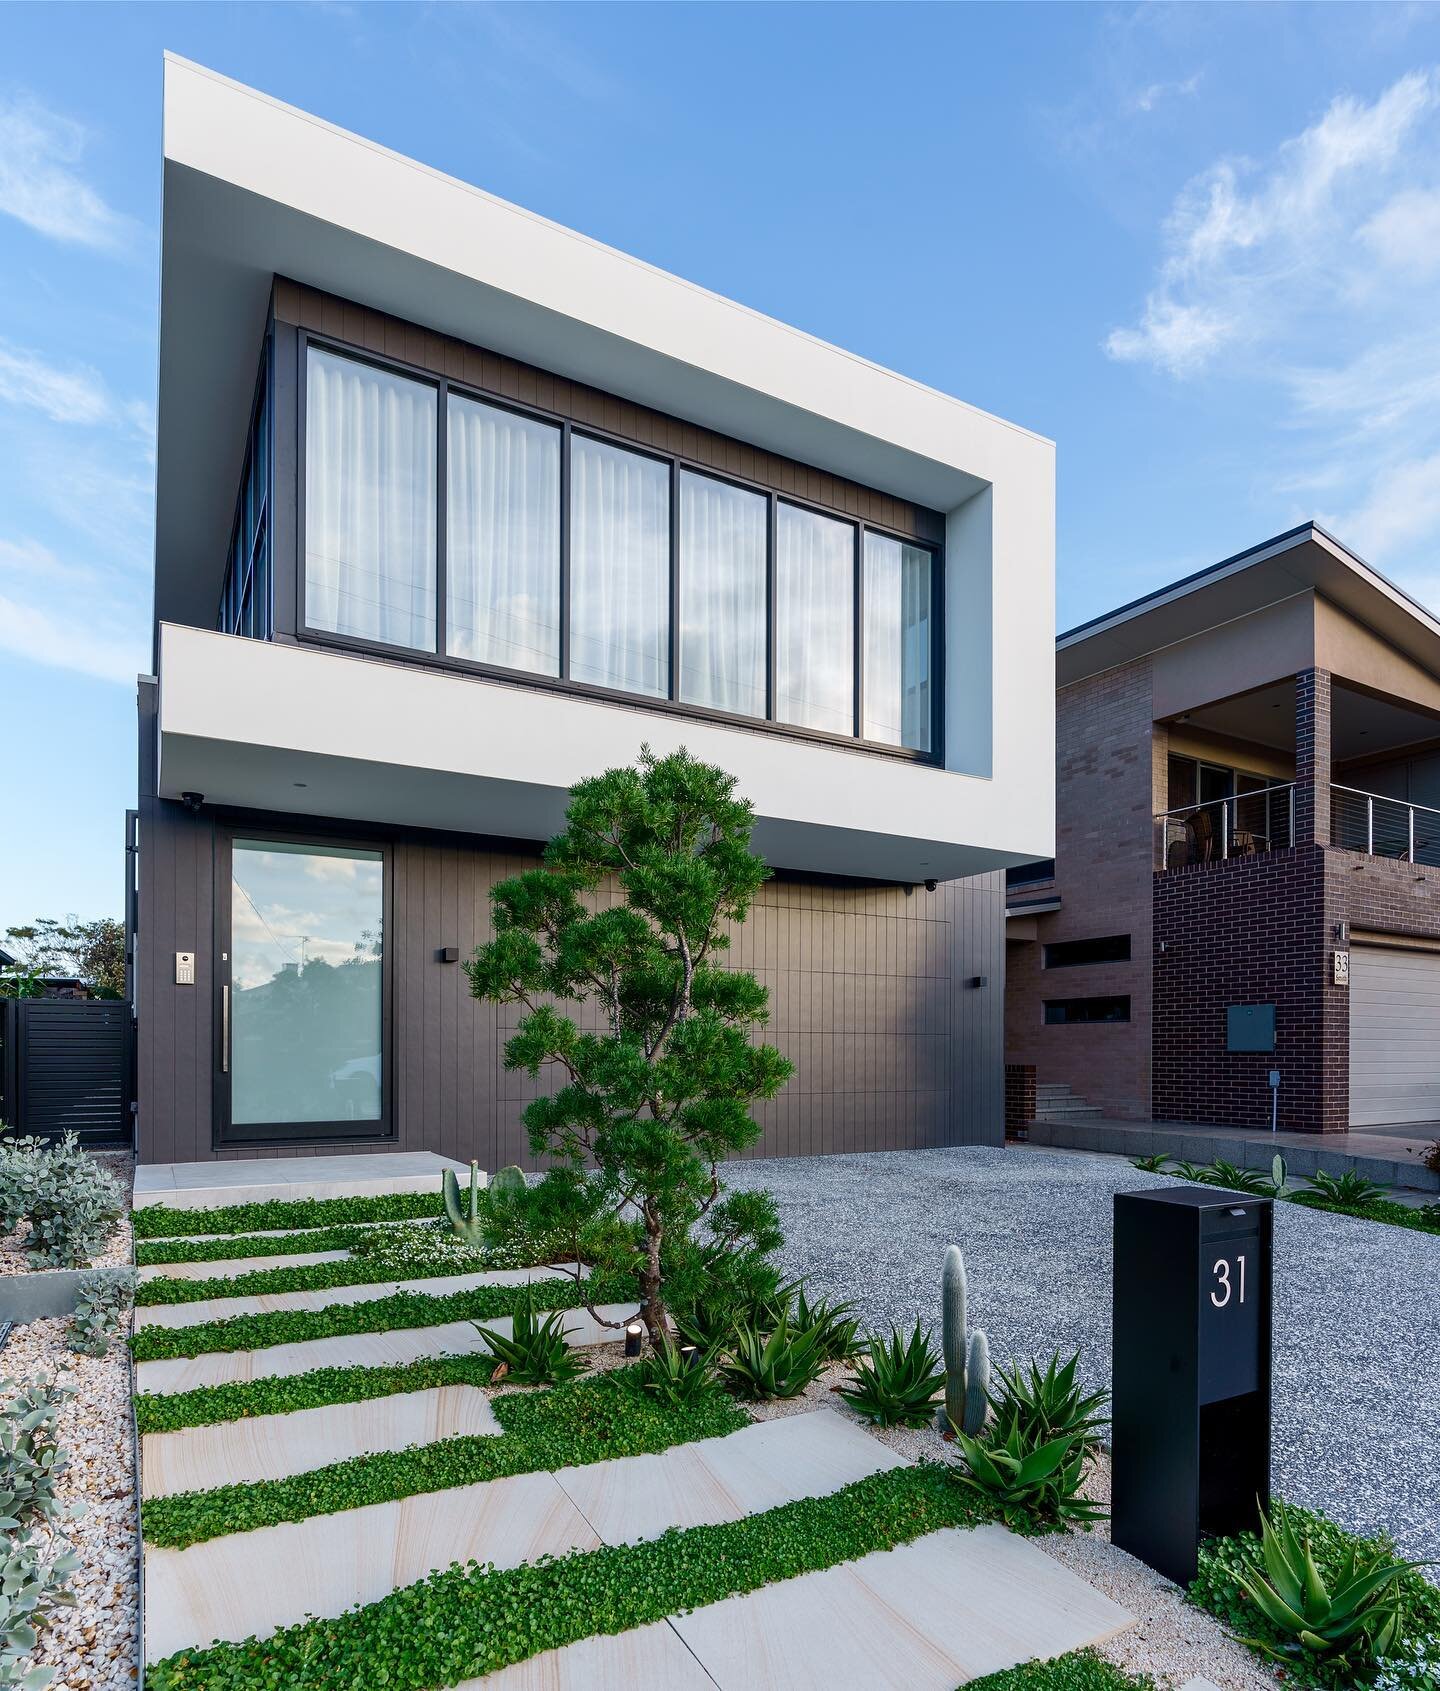 ~ Smith Street Residence ~
.
Our more modern design alongside Merewether&rsquo;s heritage corridor helping differentiate between old and new
.
Built by: @made_homes